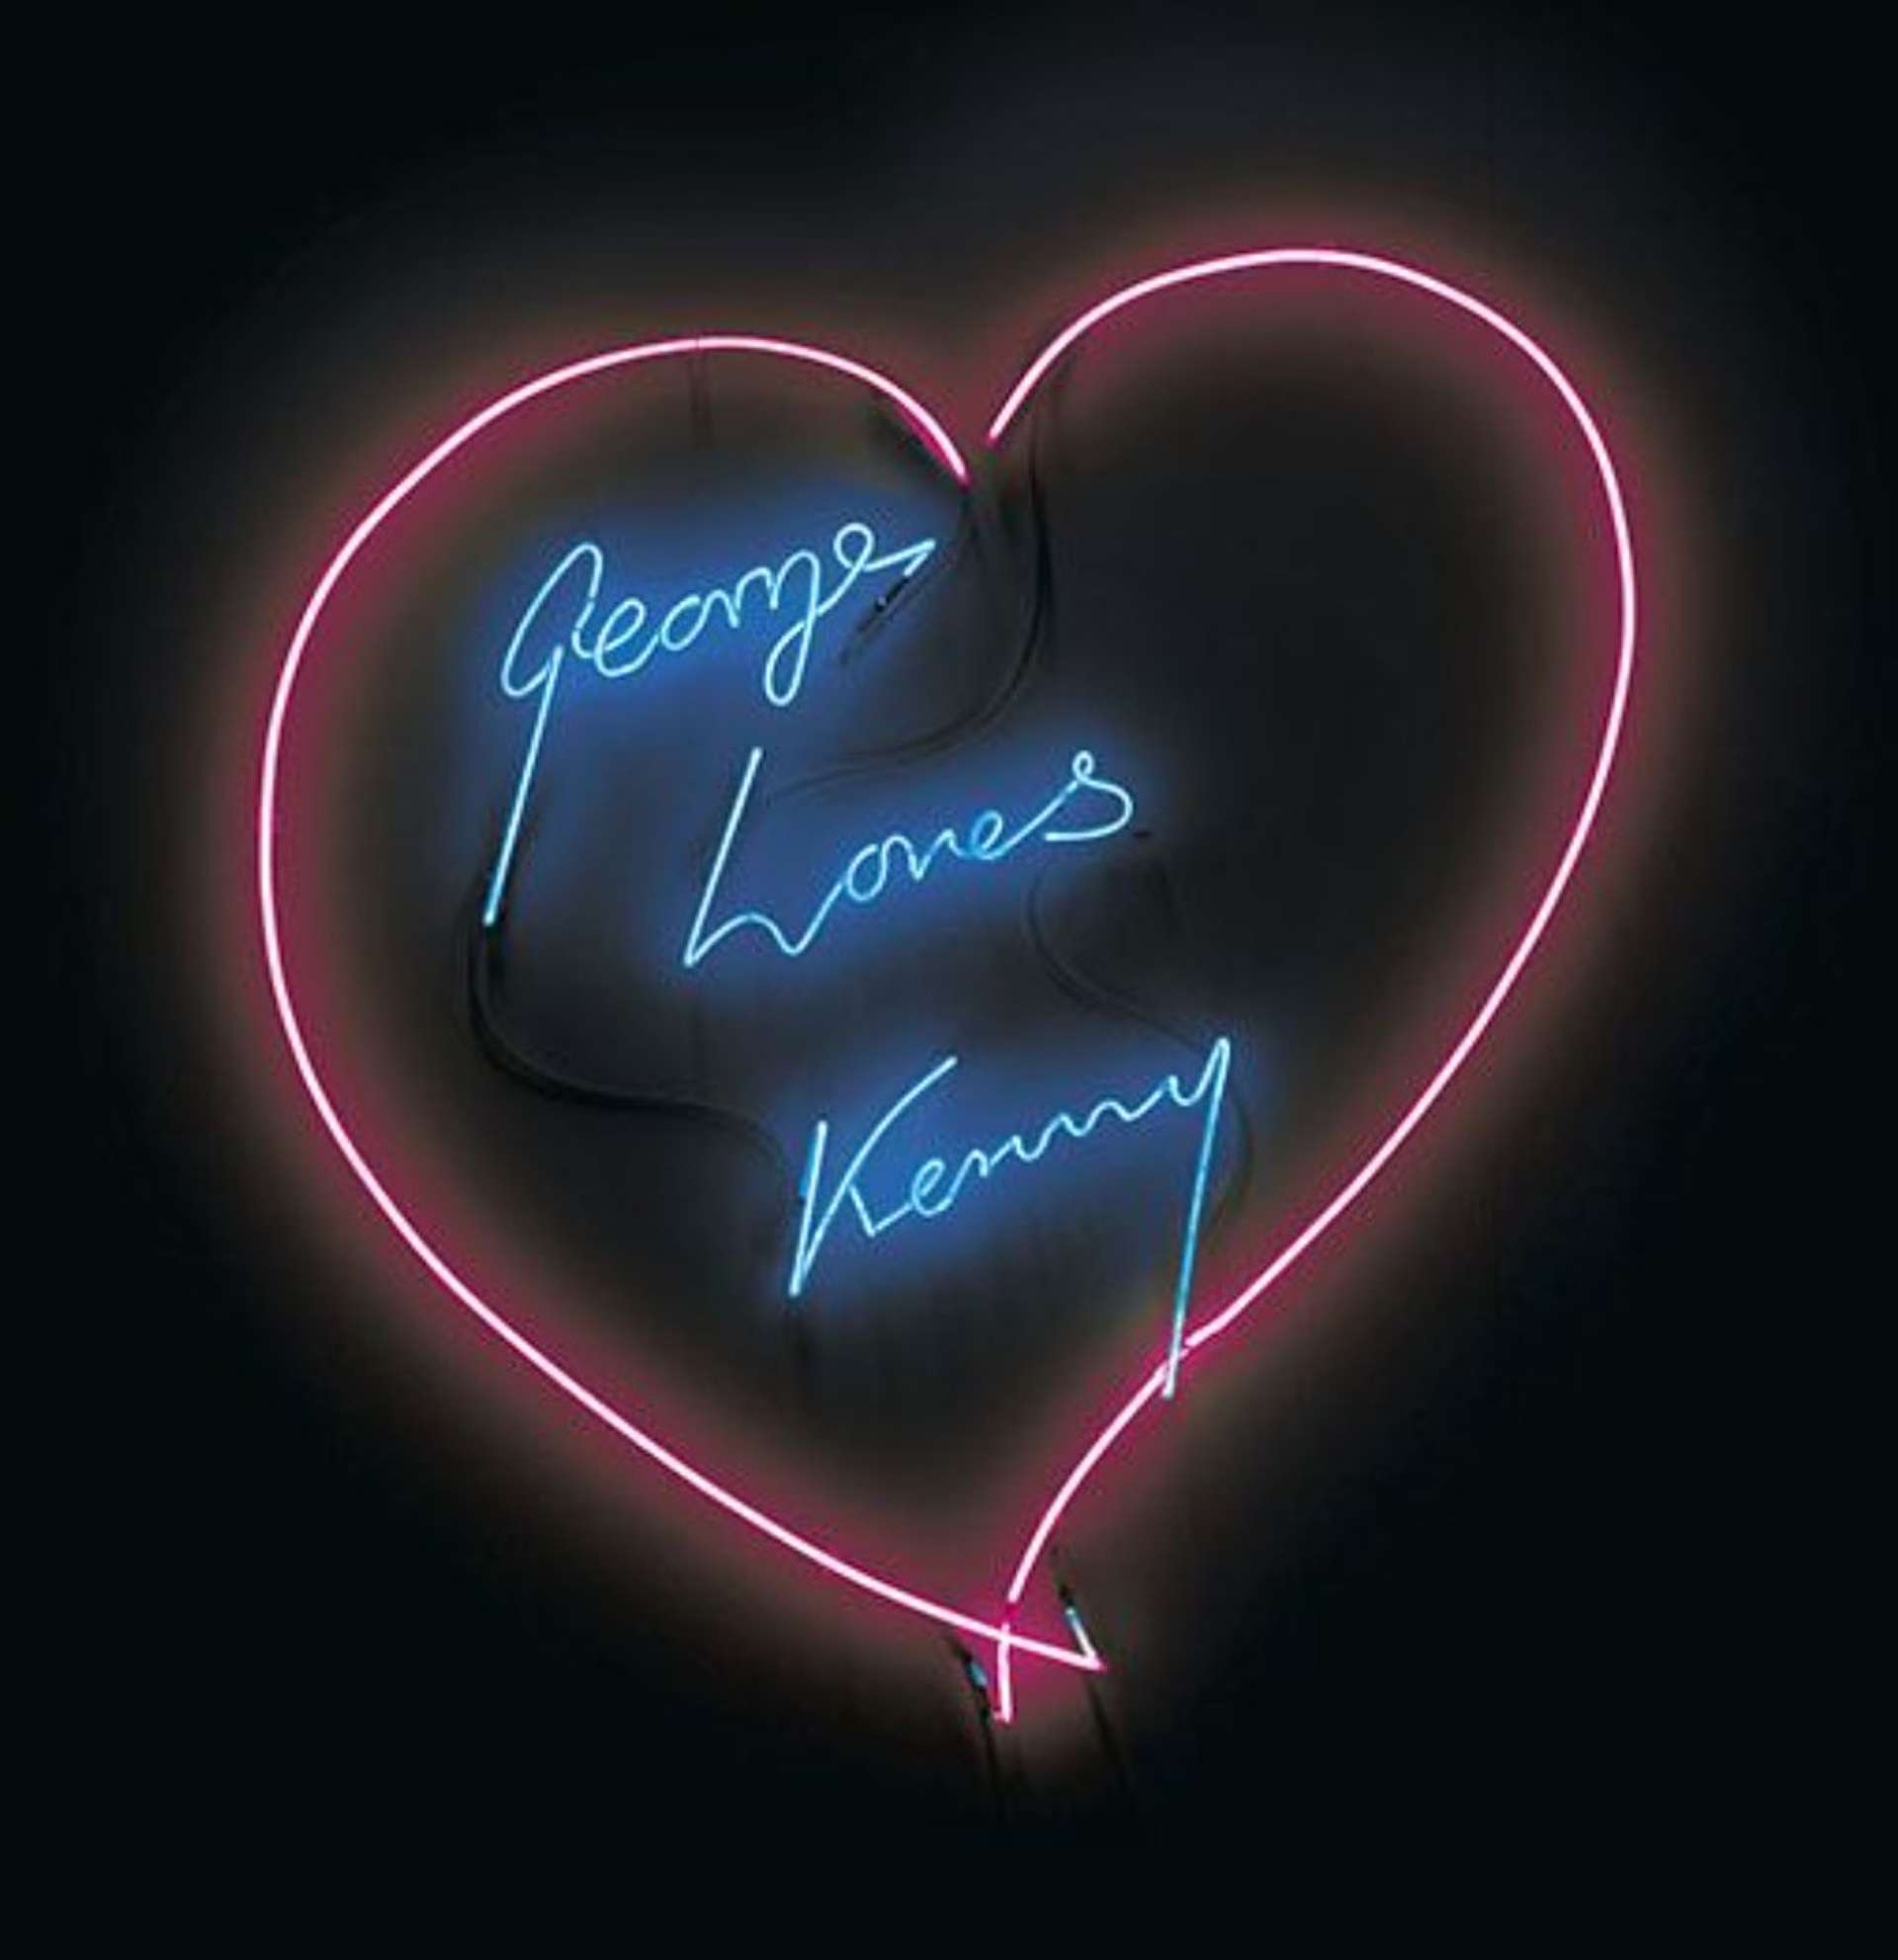 A Look At Tracey Emin's Neon Works